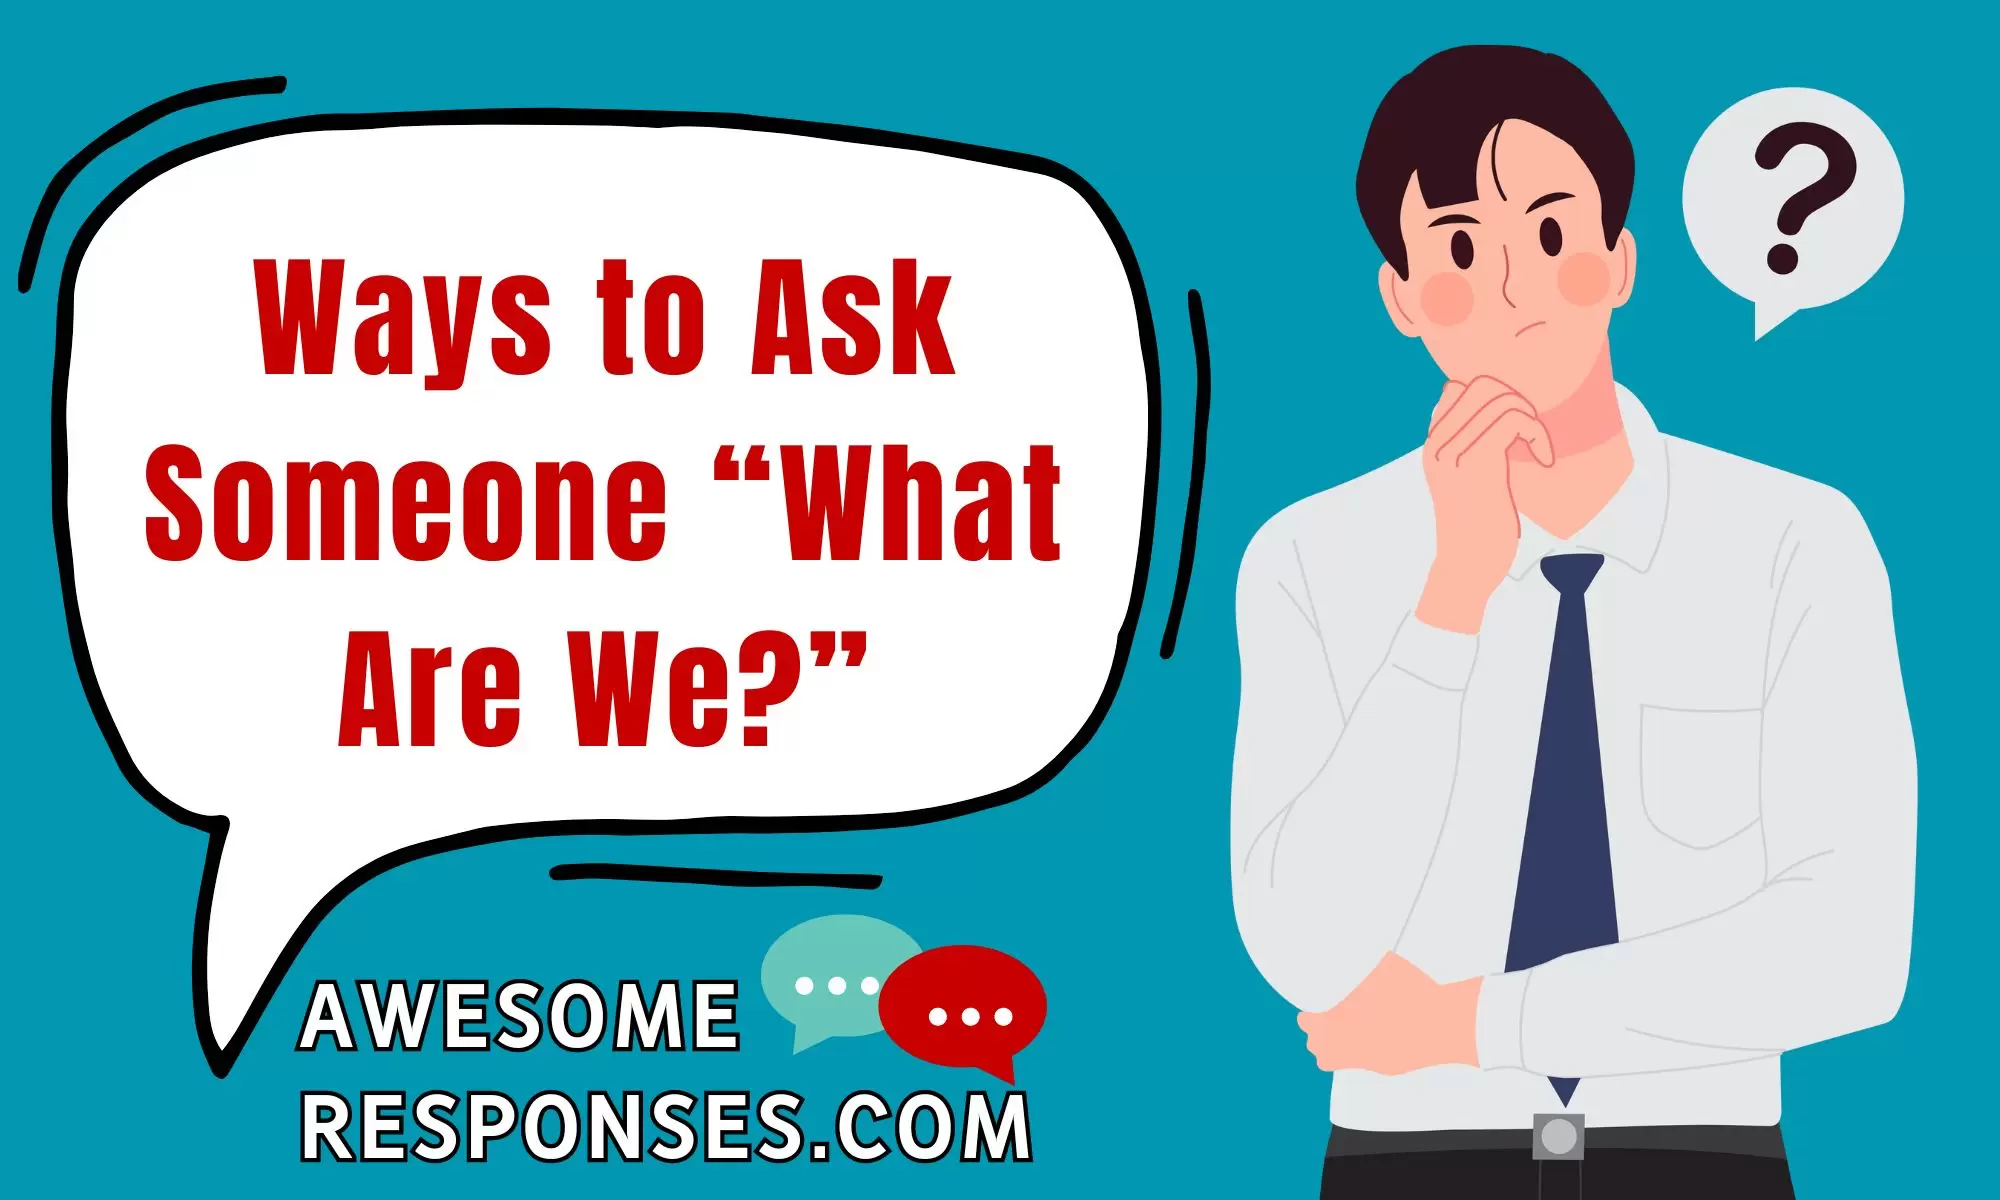 Ways to Ask Someone “What Are We?”